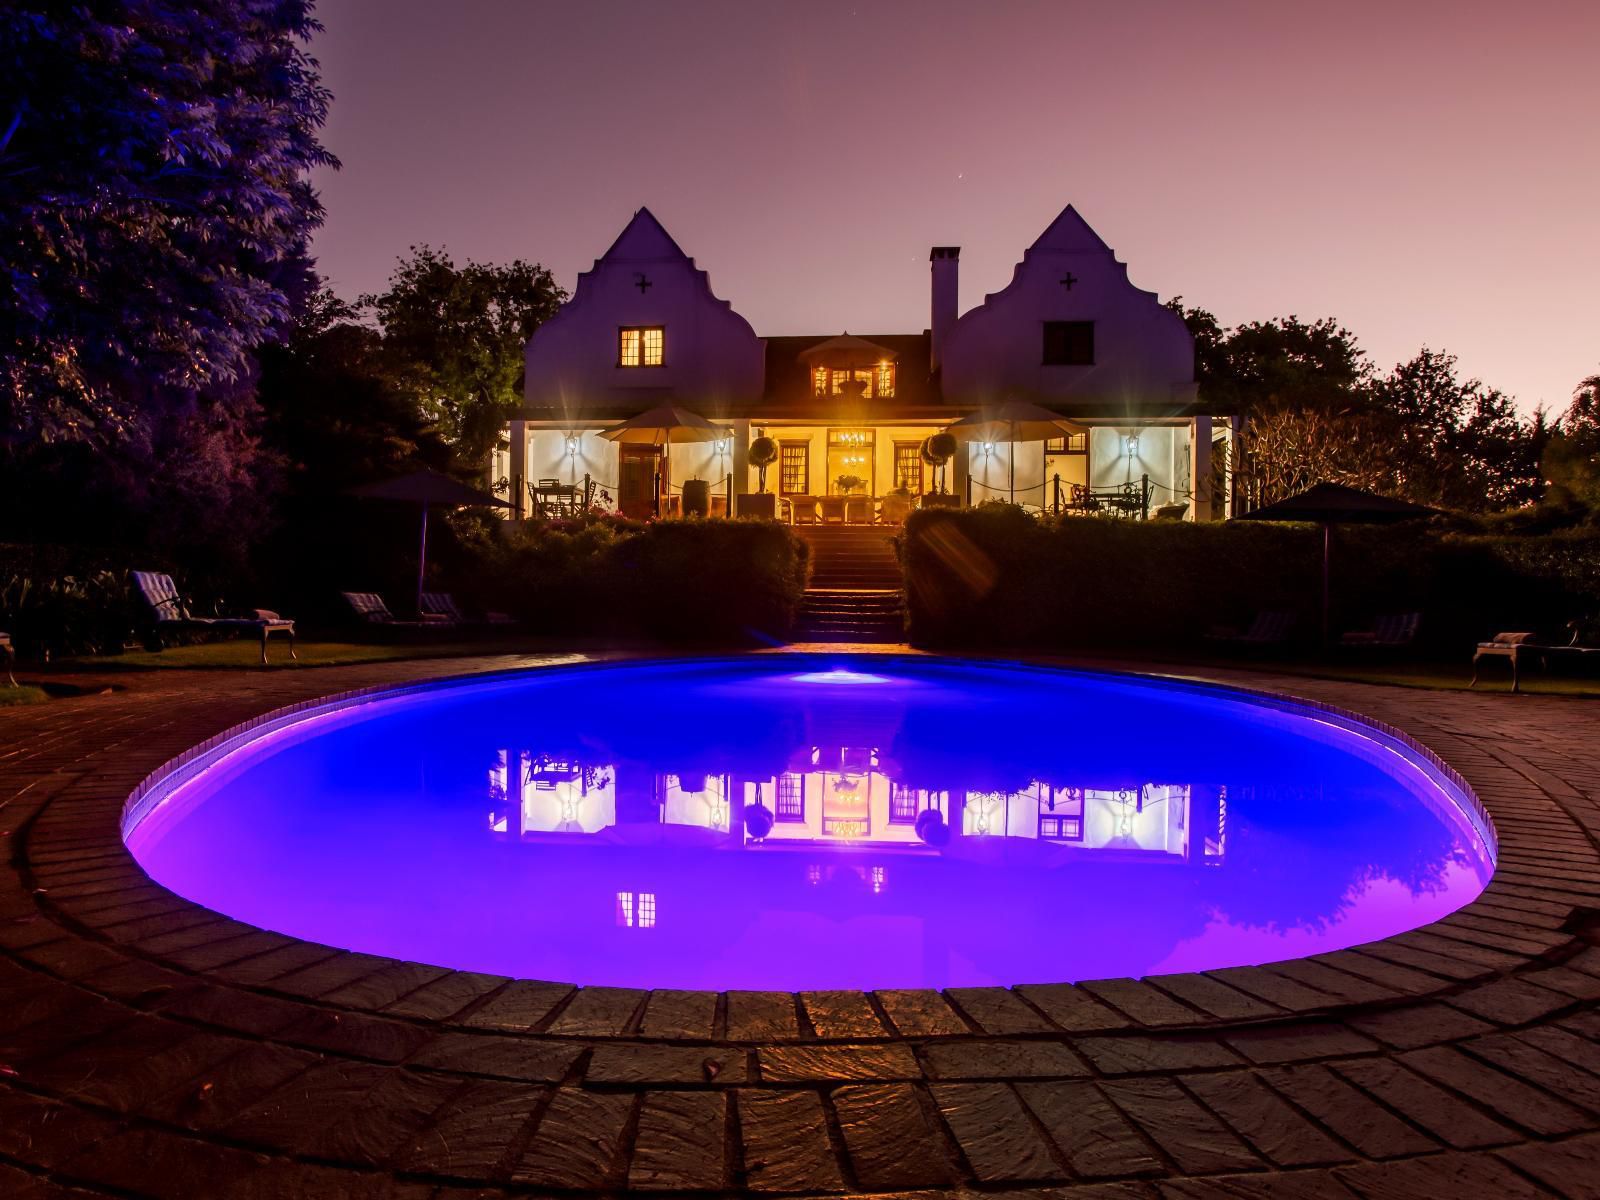 Vredenburg Manor House Raithby Stellenbosch Western Cape South Africa House, Building, Architecture, Swimming Pool